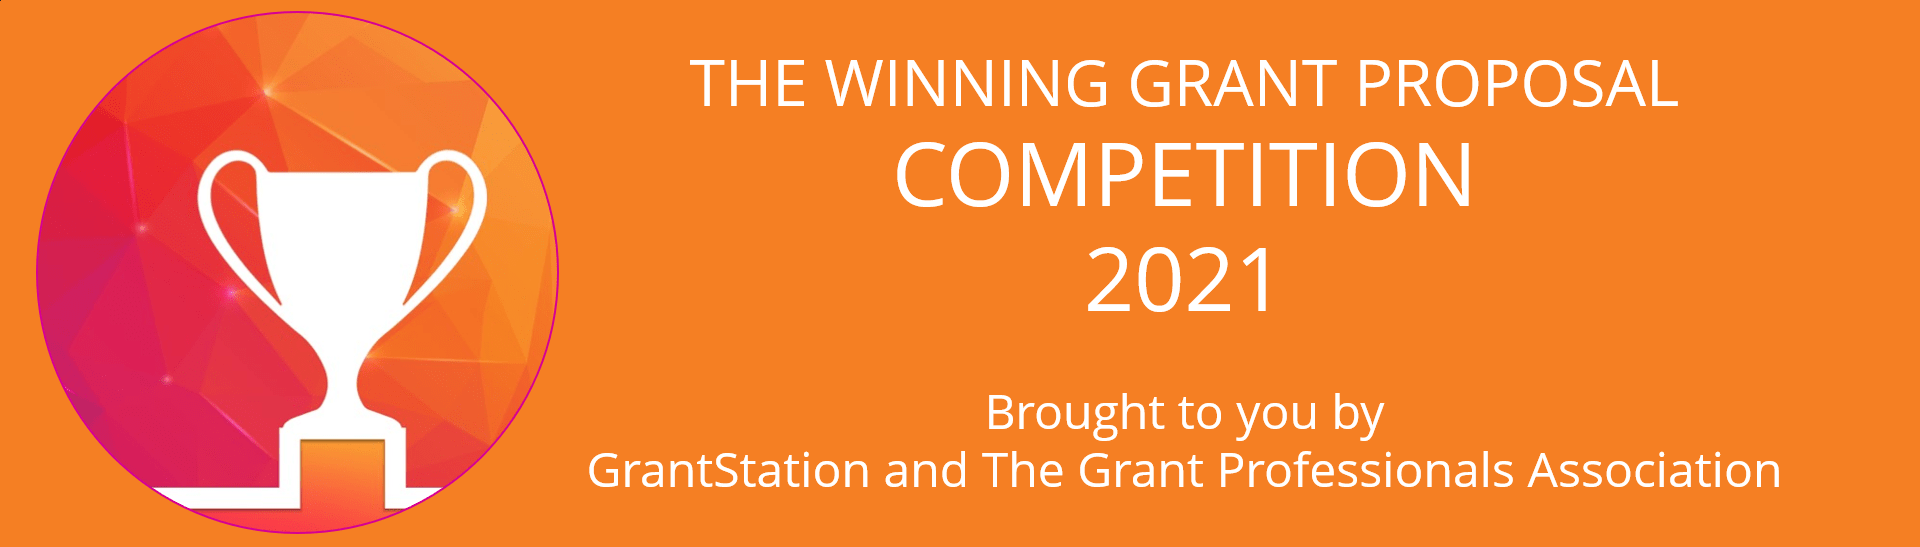 The Winning Grant Proposal Competition 2021 